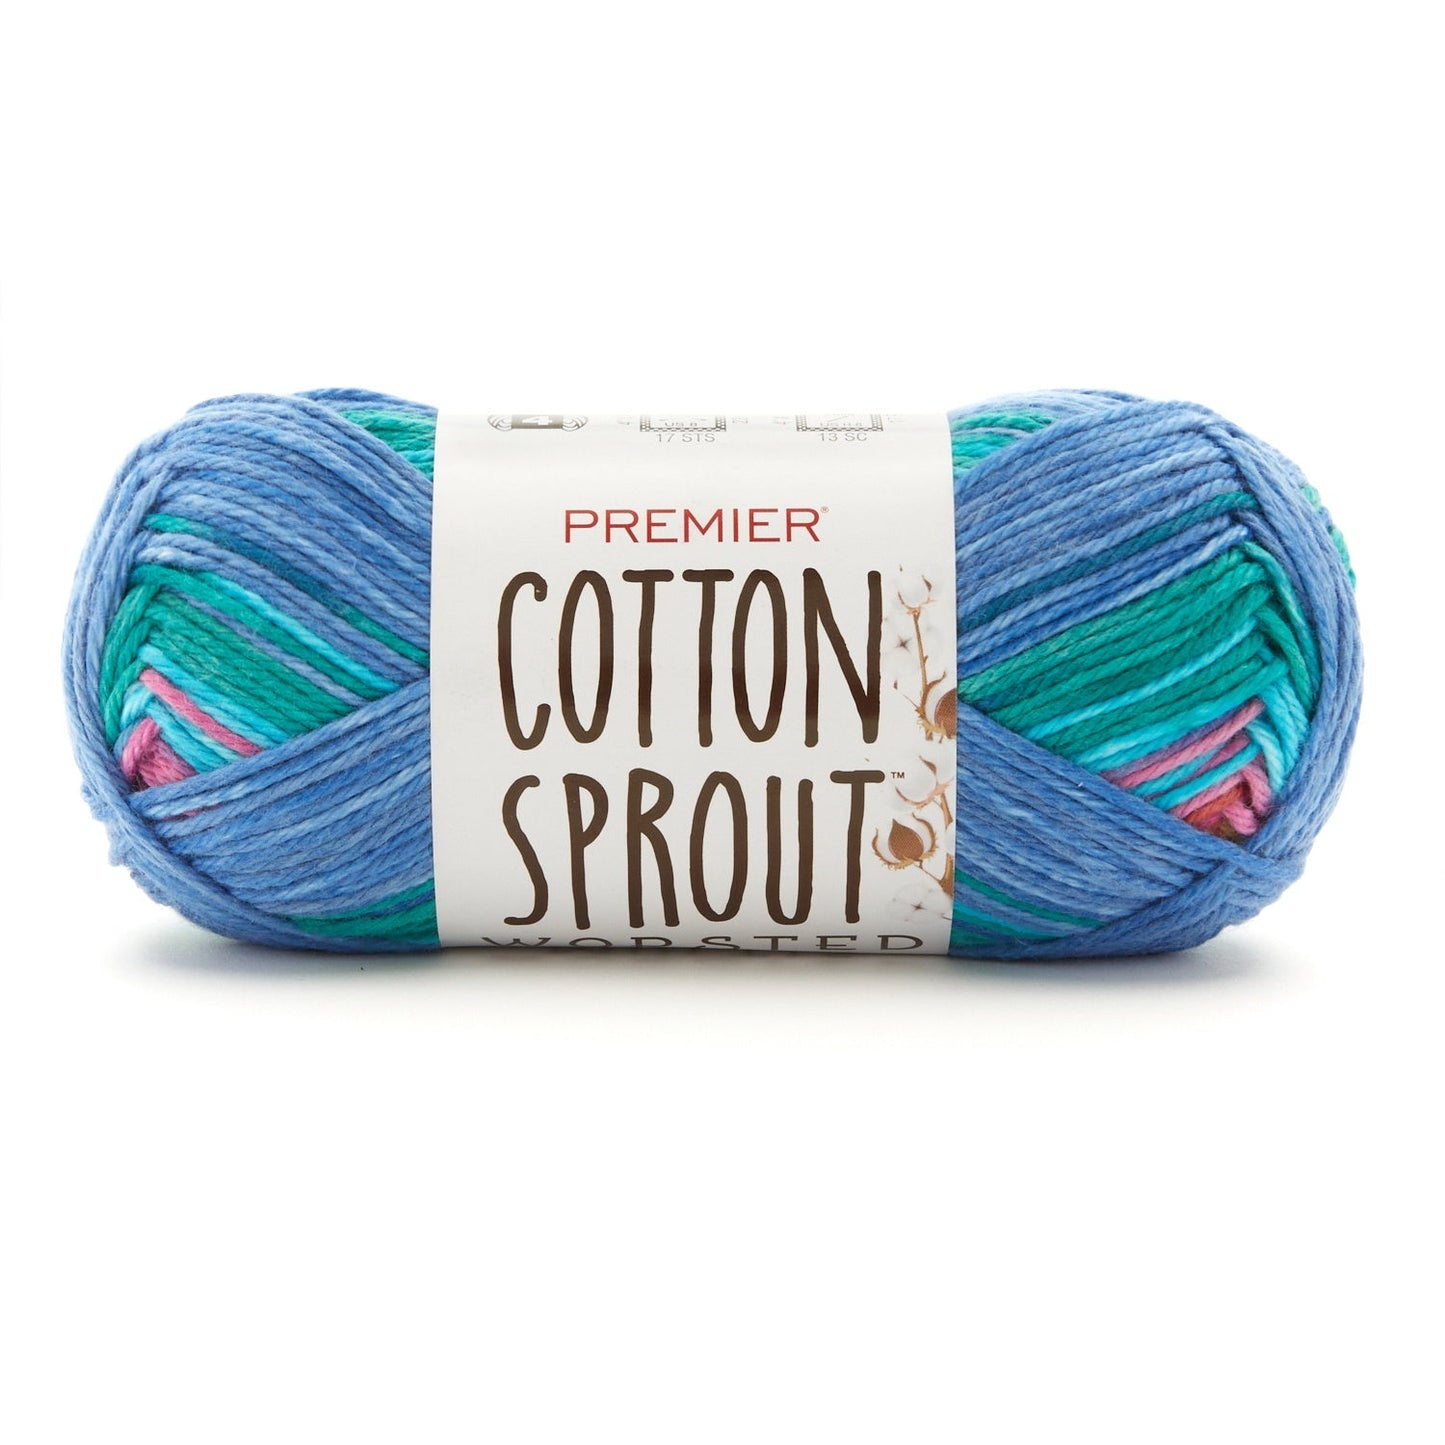 Premier cotton sprout worsted multi yarn - 5